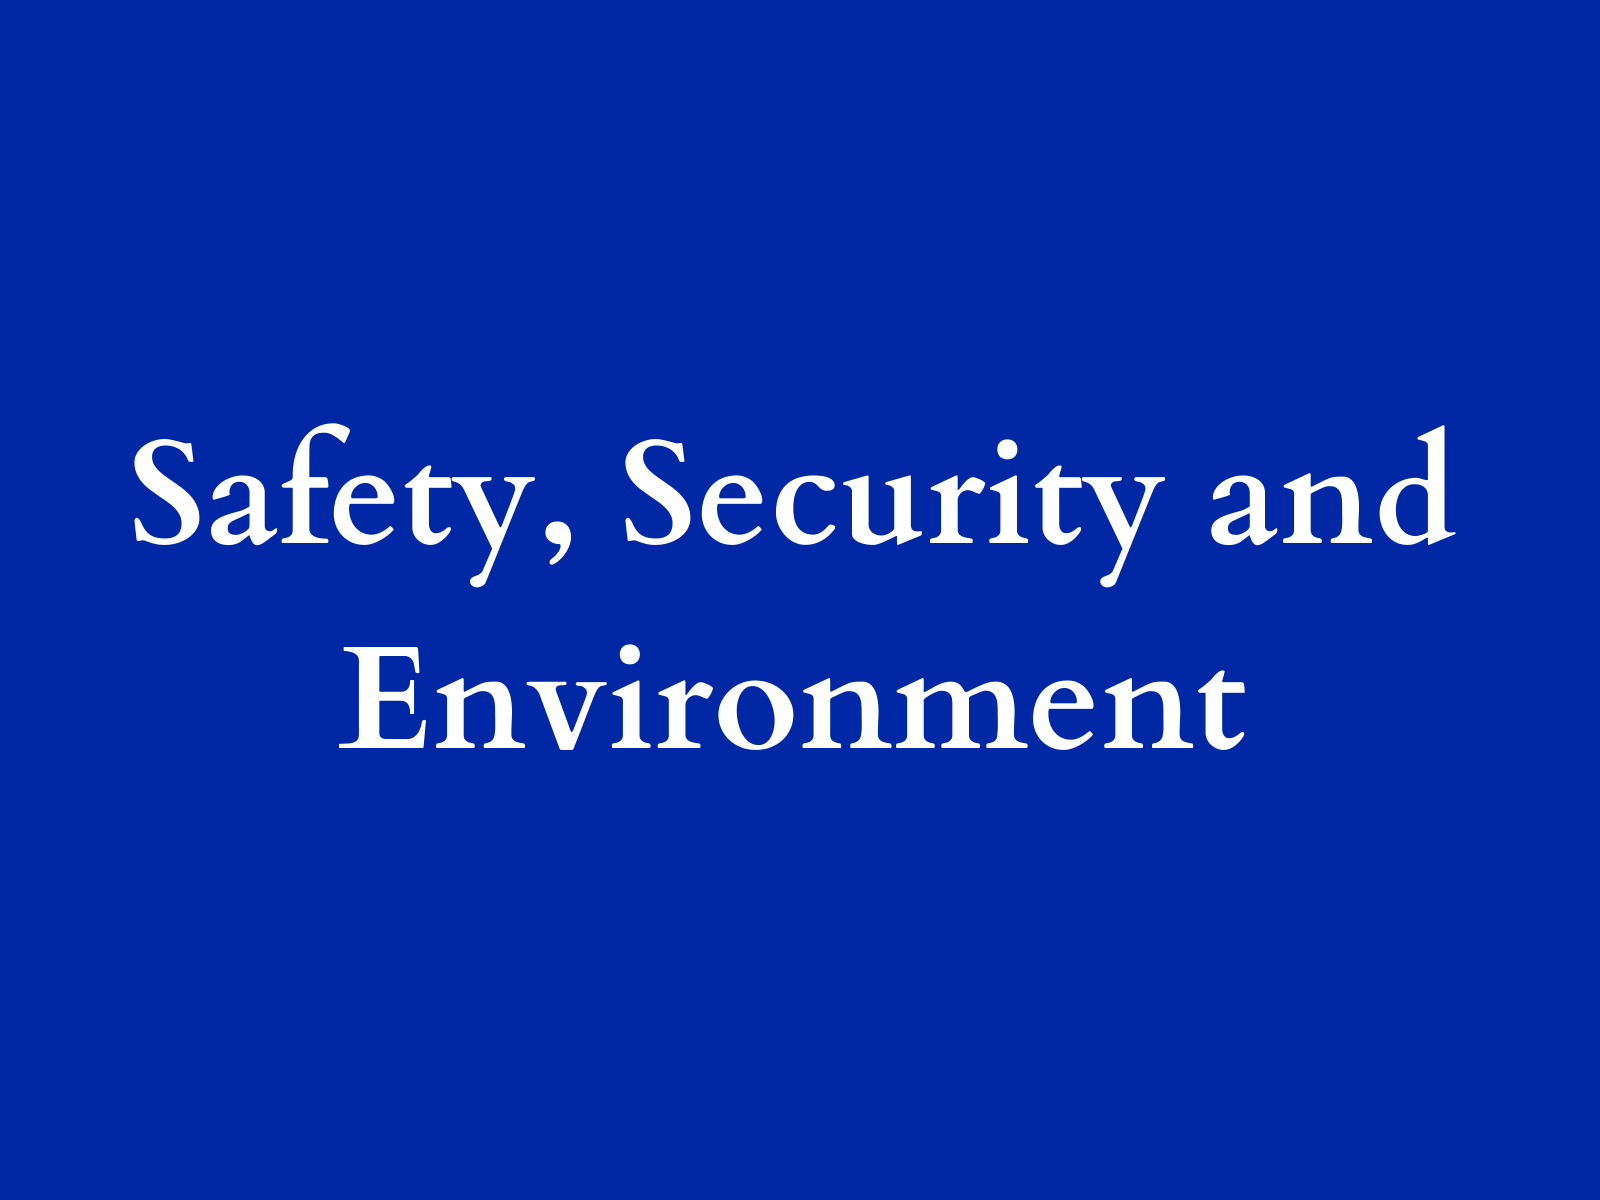 Safety Security and Environment